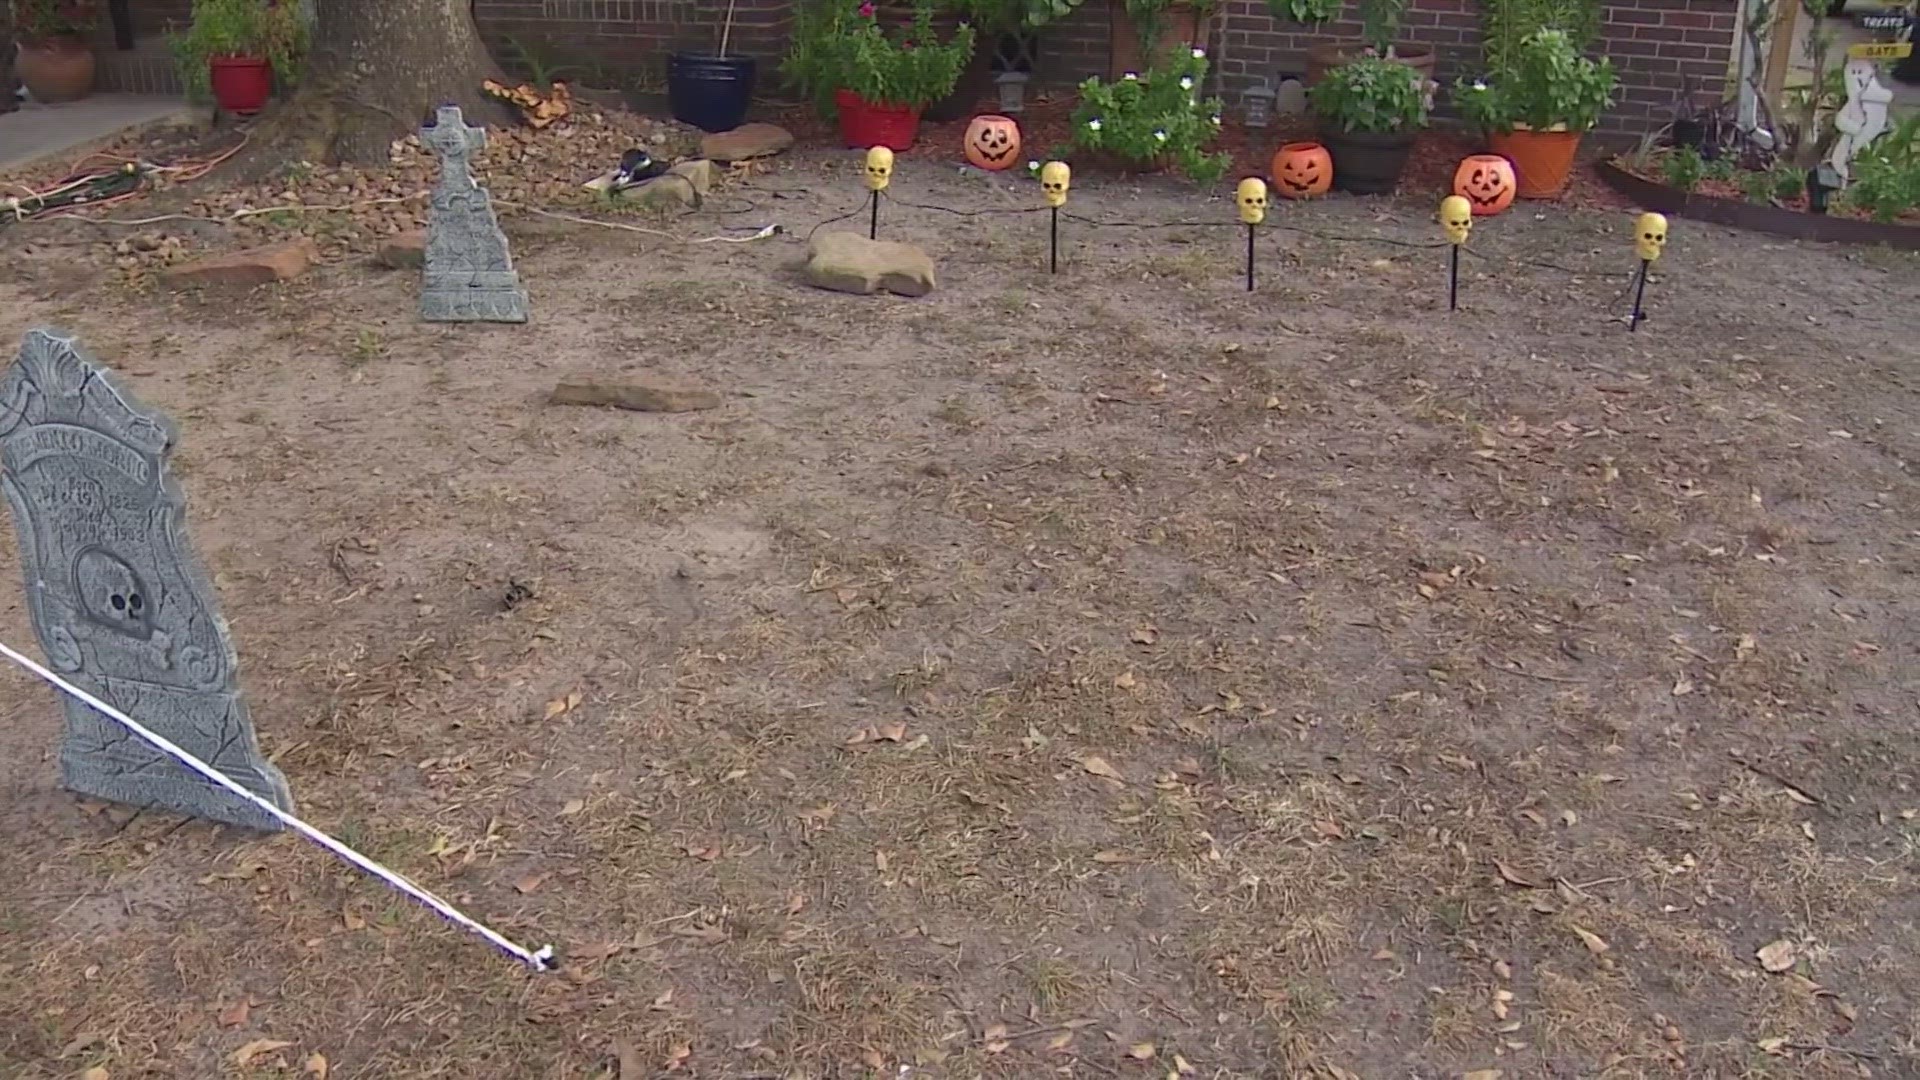 Hours after decorating their homes for Halloween, neighbors woke up to missing items from their front yards.